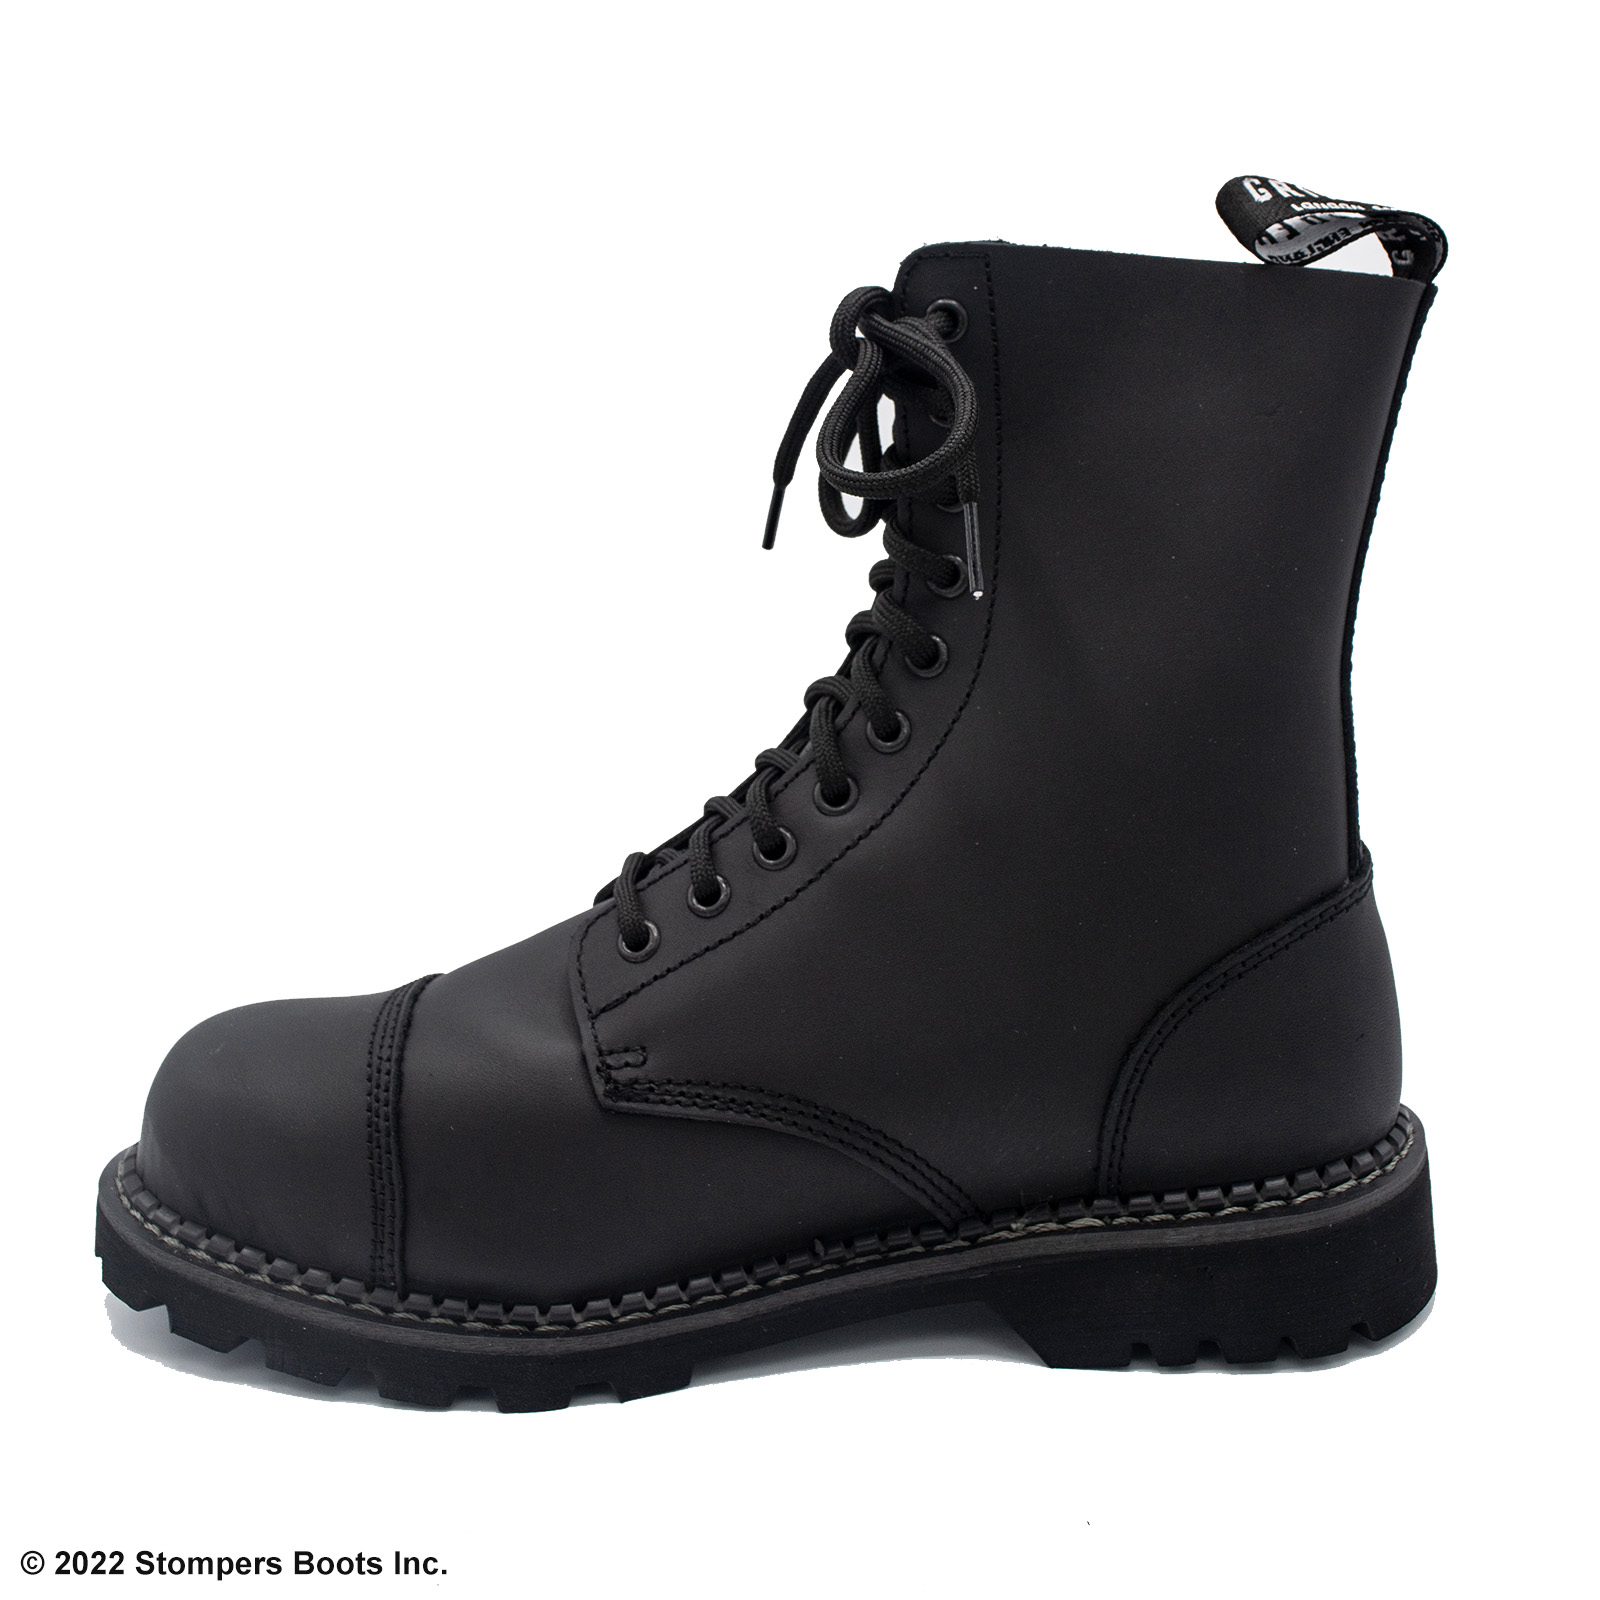 Grinders Hunter Black Steel Toe Boots | Stompers Boots